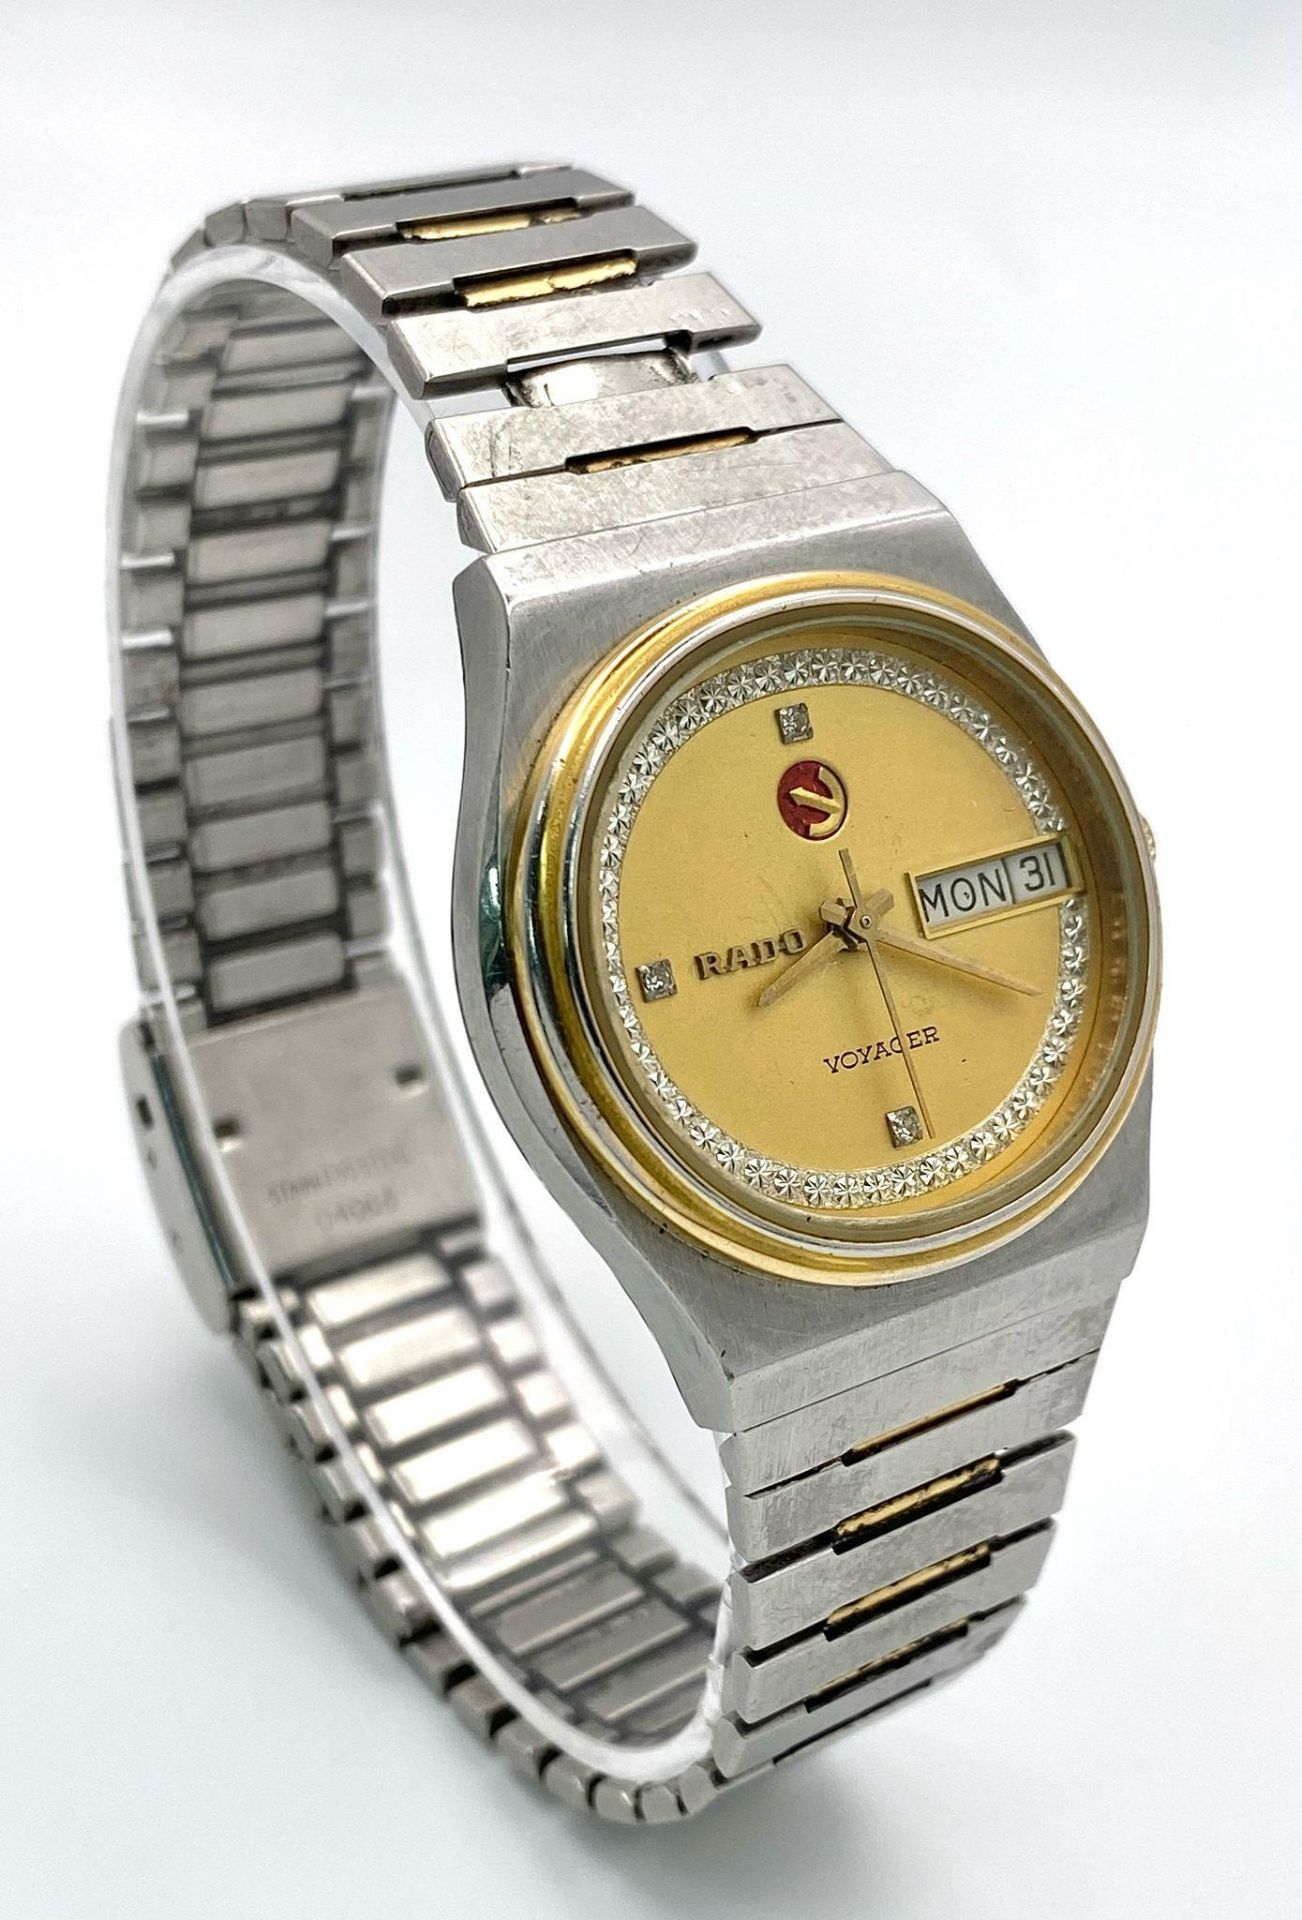 A Vintage Rado Voyager Automatic Unisex Watch. Stainless steel bracelet and case - 33mm. Gilded dial - Bild 3 aus 7